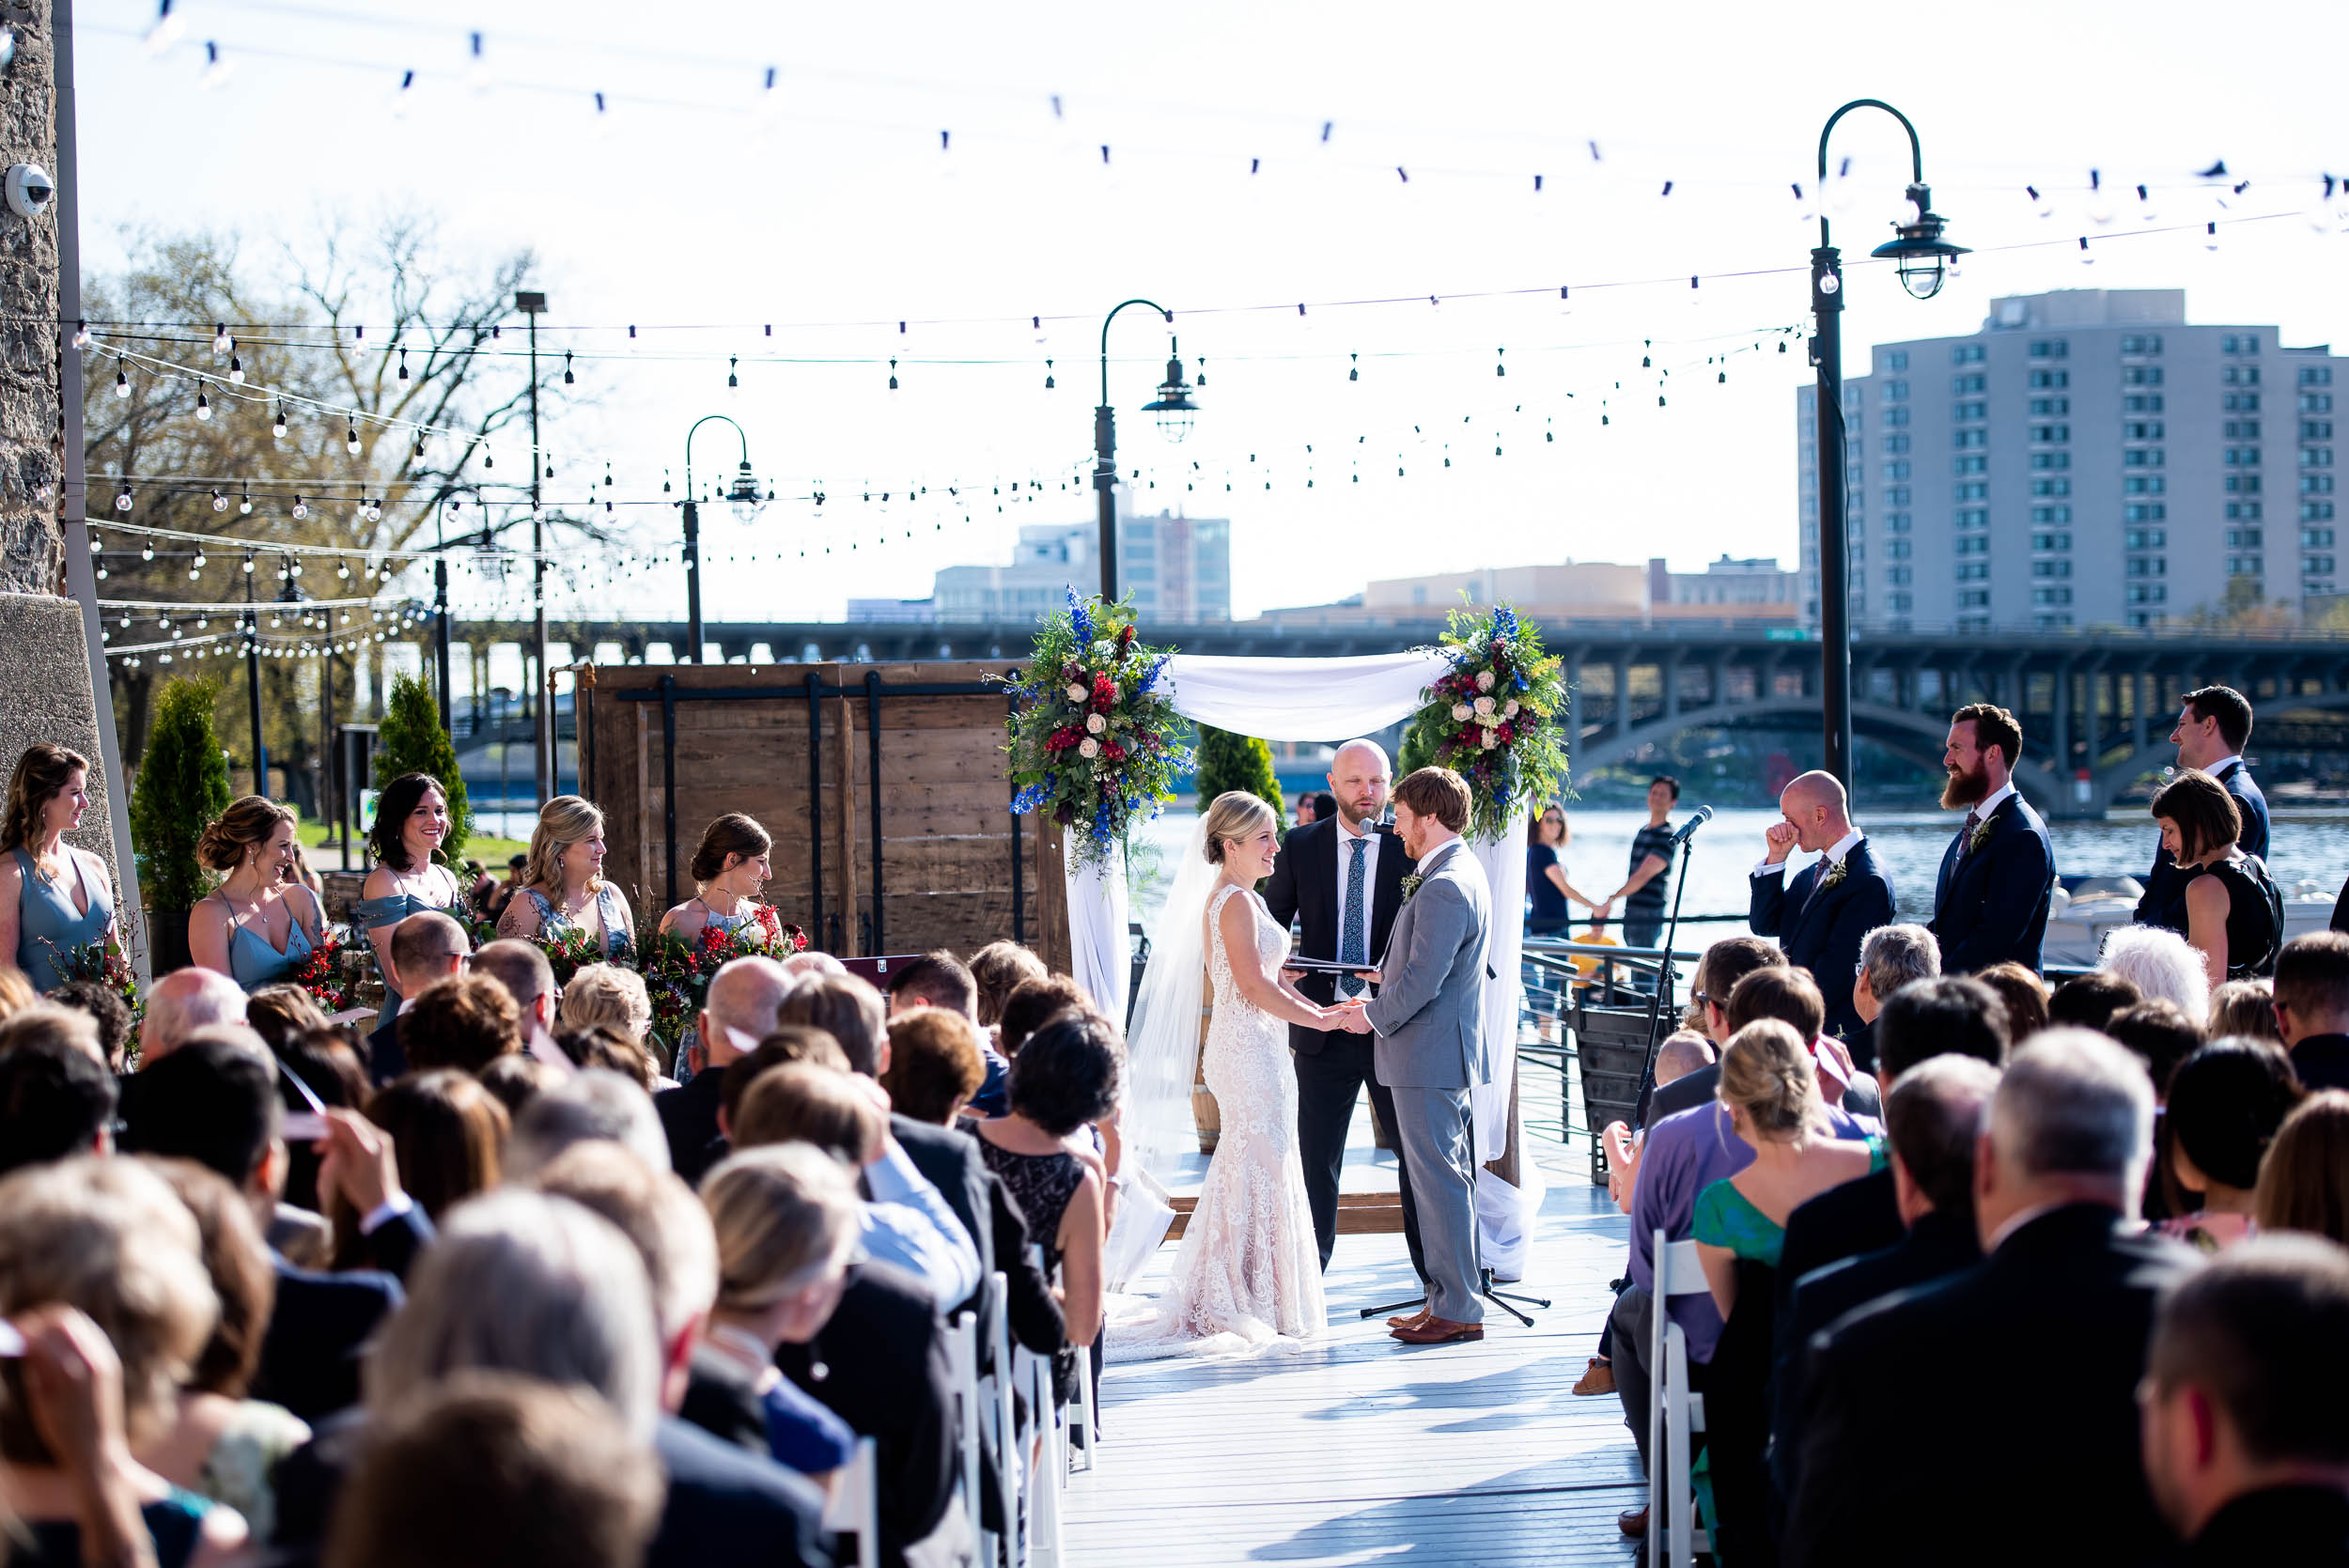 Wedding ceremony inspiration: Modern industrial Chicago wedding inside Prairie Street Brewhouse captured by J. Brown Photography. Find more wedding ideas at jbrownphotography.com!